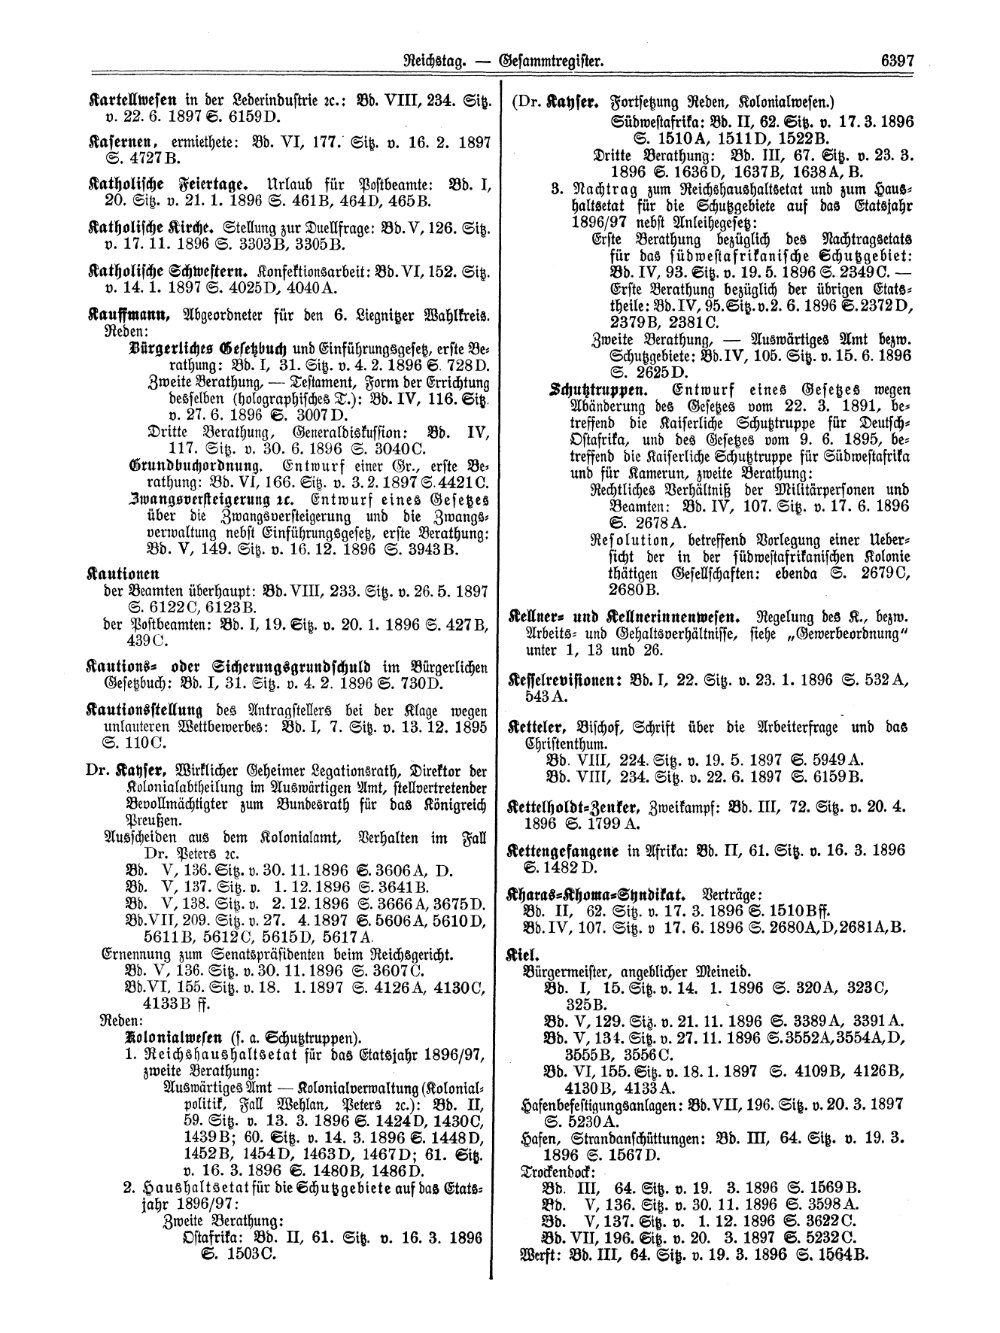 Scan of page 6397